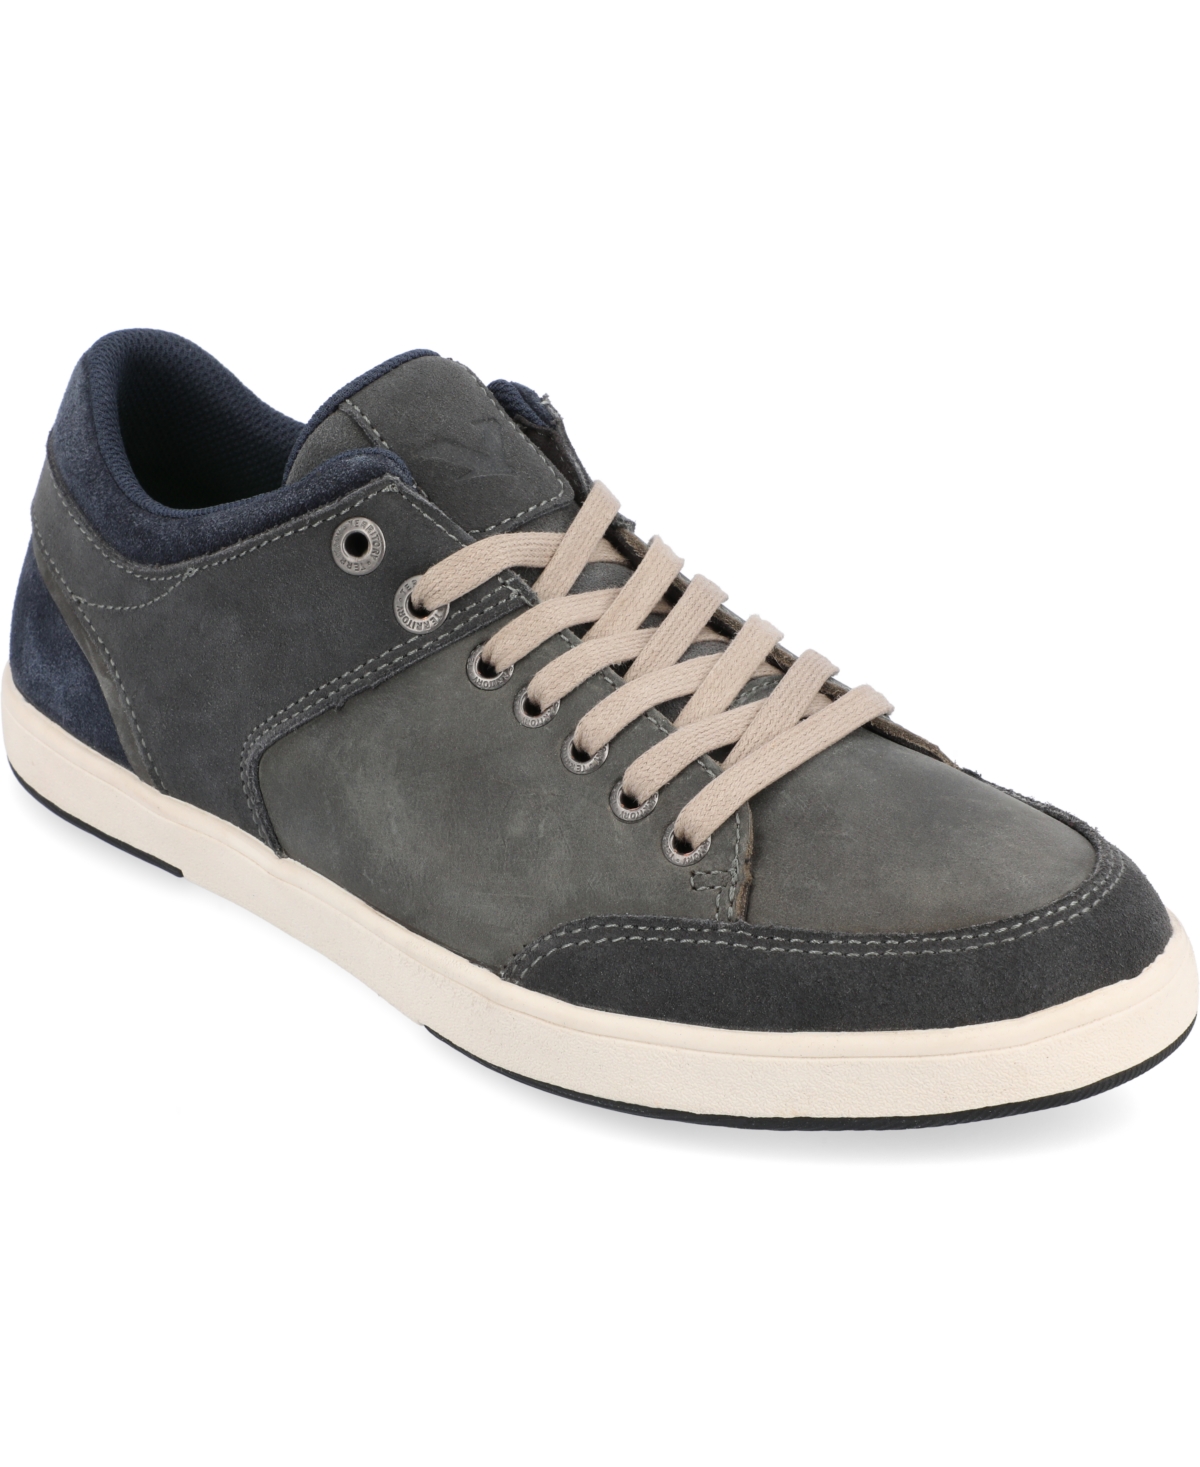 Men's Pacer Casual Leather Sneakers - Gray